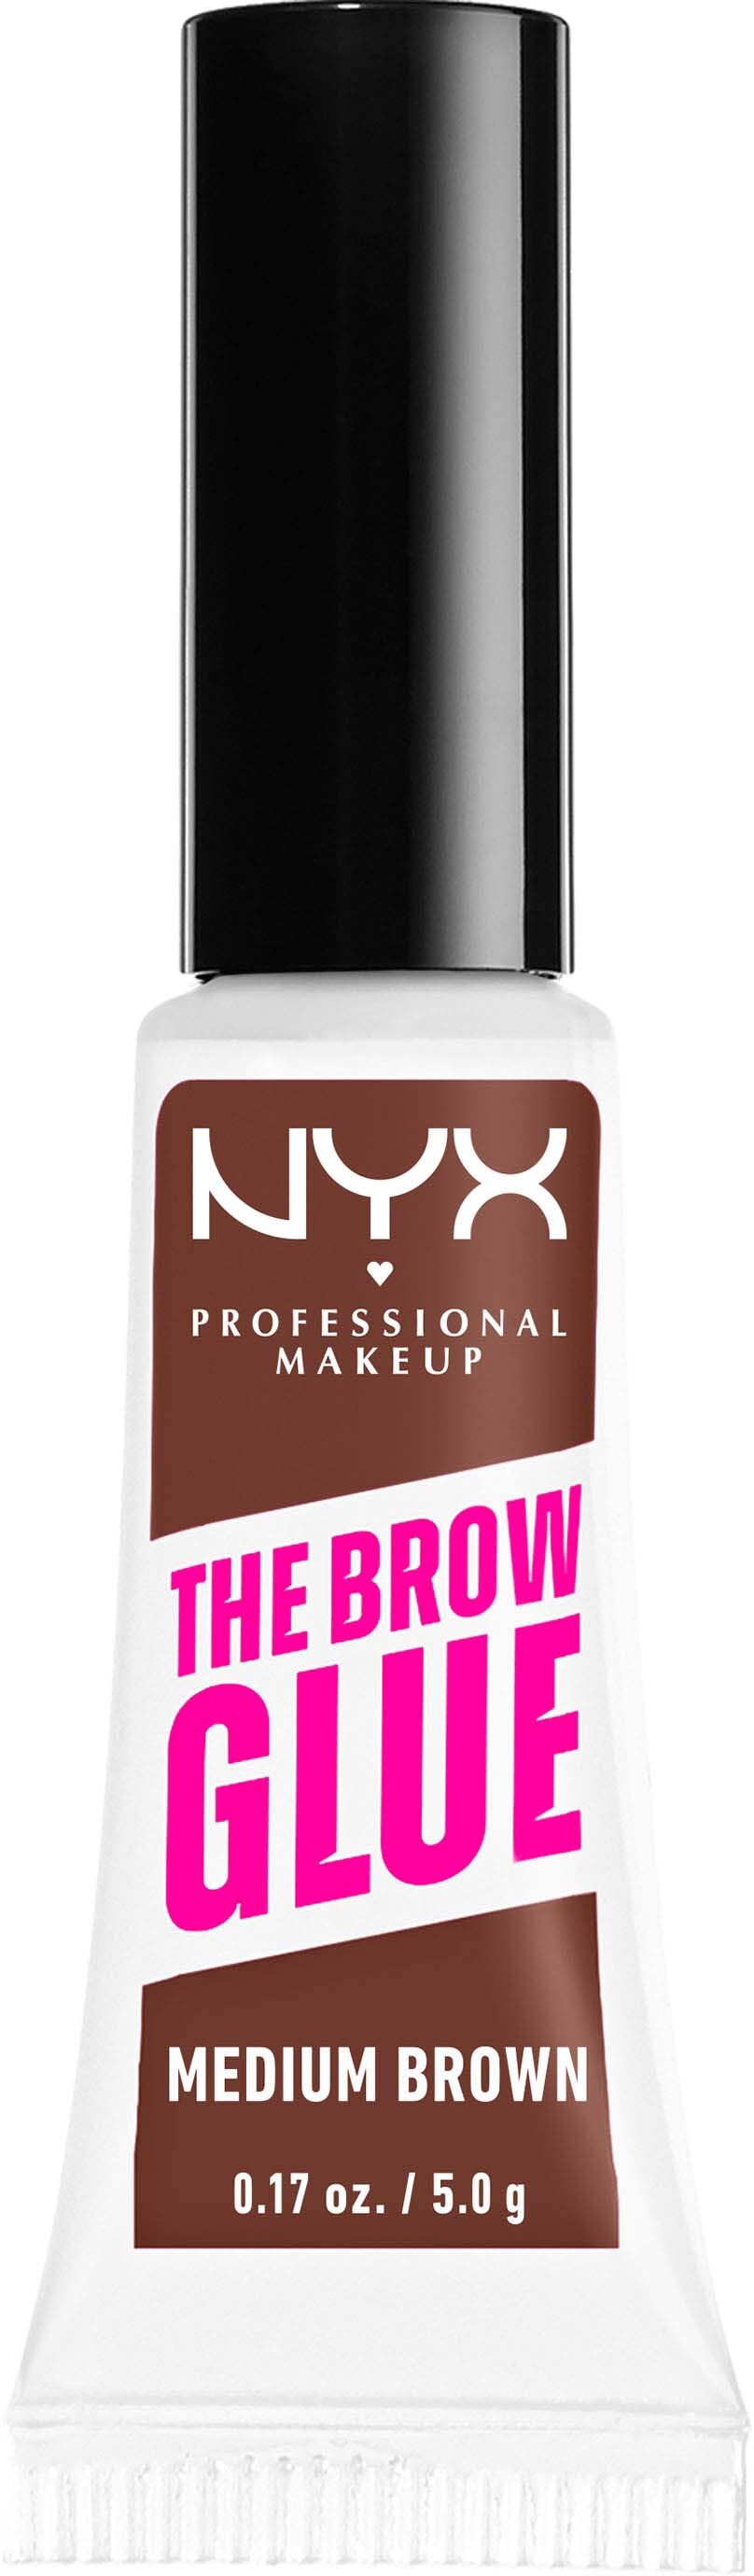 NYX PROFESSIONAL MAKEUP The Brow Glue Instant Brow Styler 03 Medi